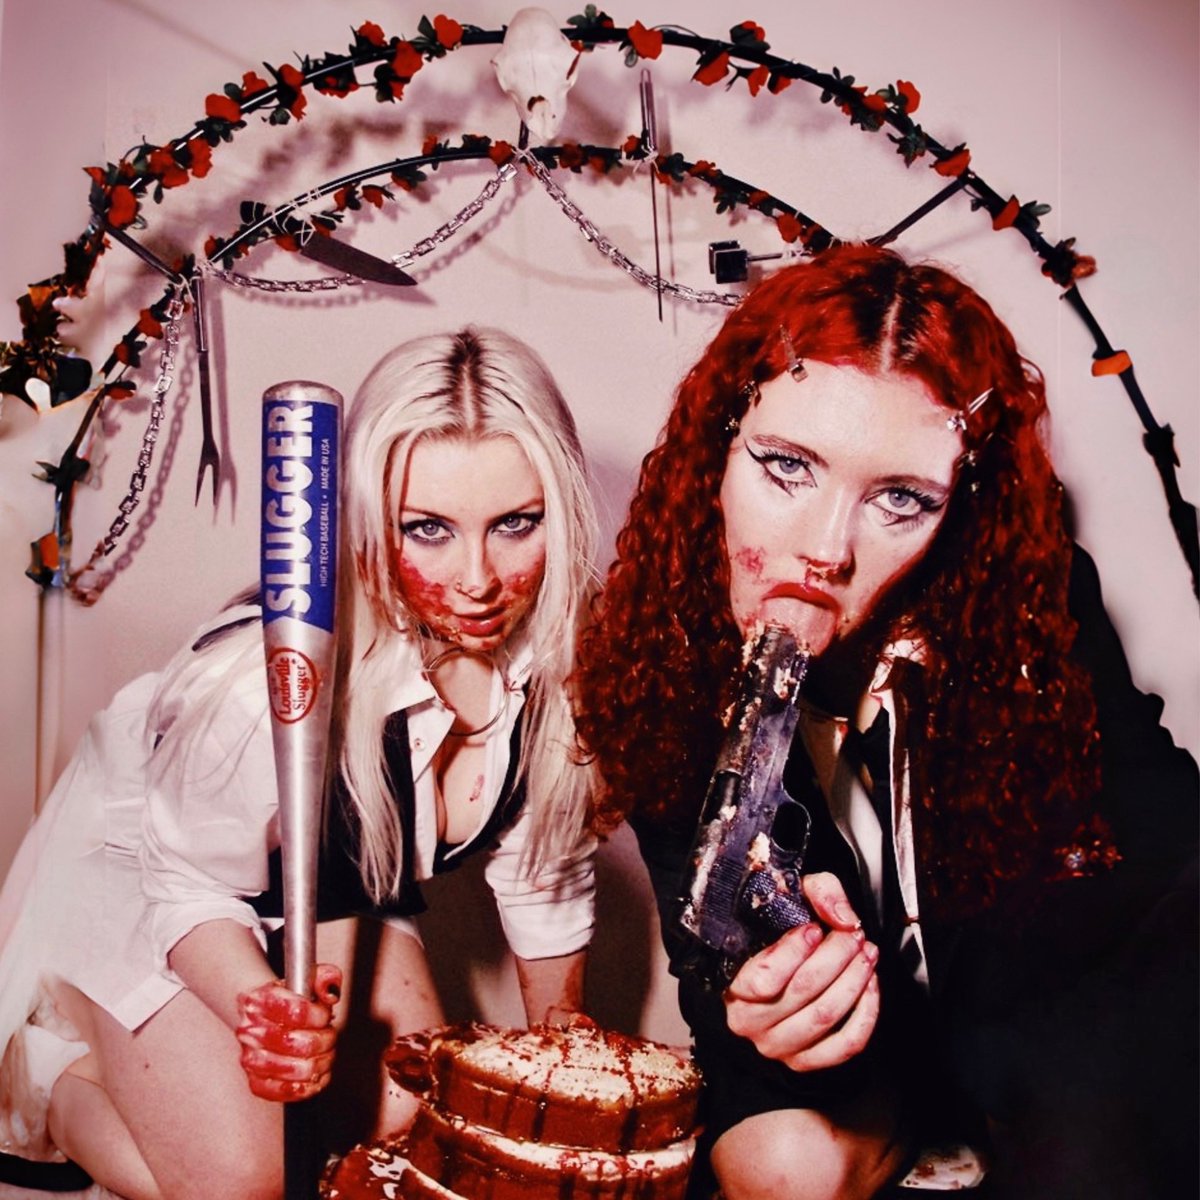 we’ve been DYING to share the artwork for “I WANT A DIVORCE (Before I Murder You)” & now it’s ALL YOURS🩸🔪 we had soo much fun shooting this with Caitlyn💋 thanku for letting us get stupidly messy & eat cake off guns xoxo PRE SAVE LINK IS IN OUR BIO so GET FUCKING AT IT!!! 🚨💥